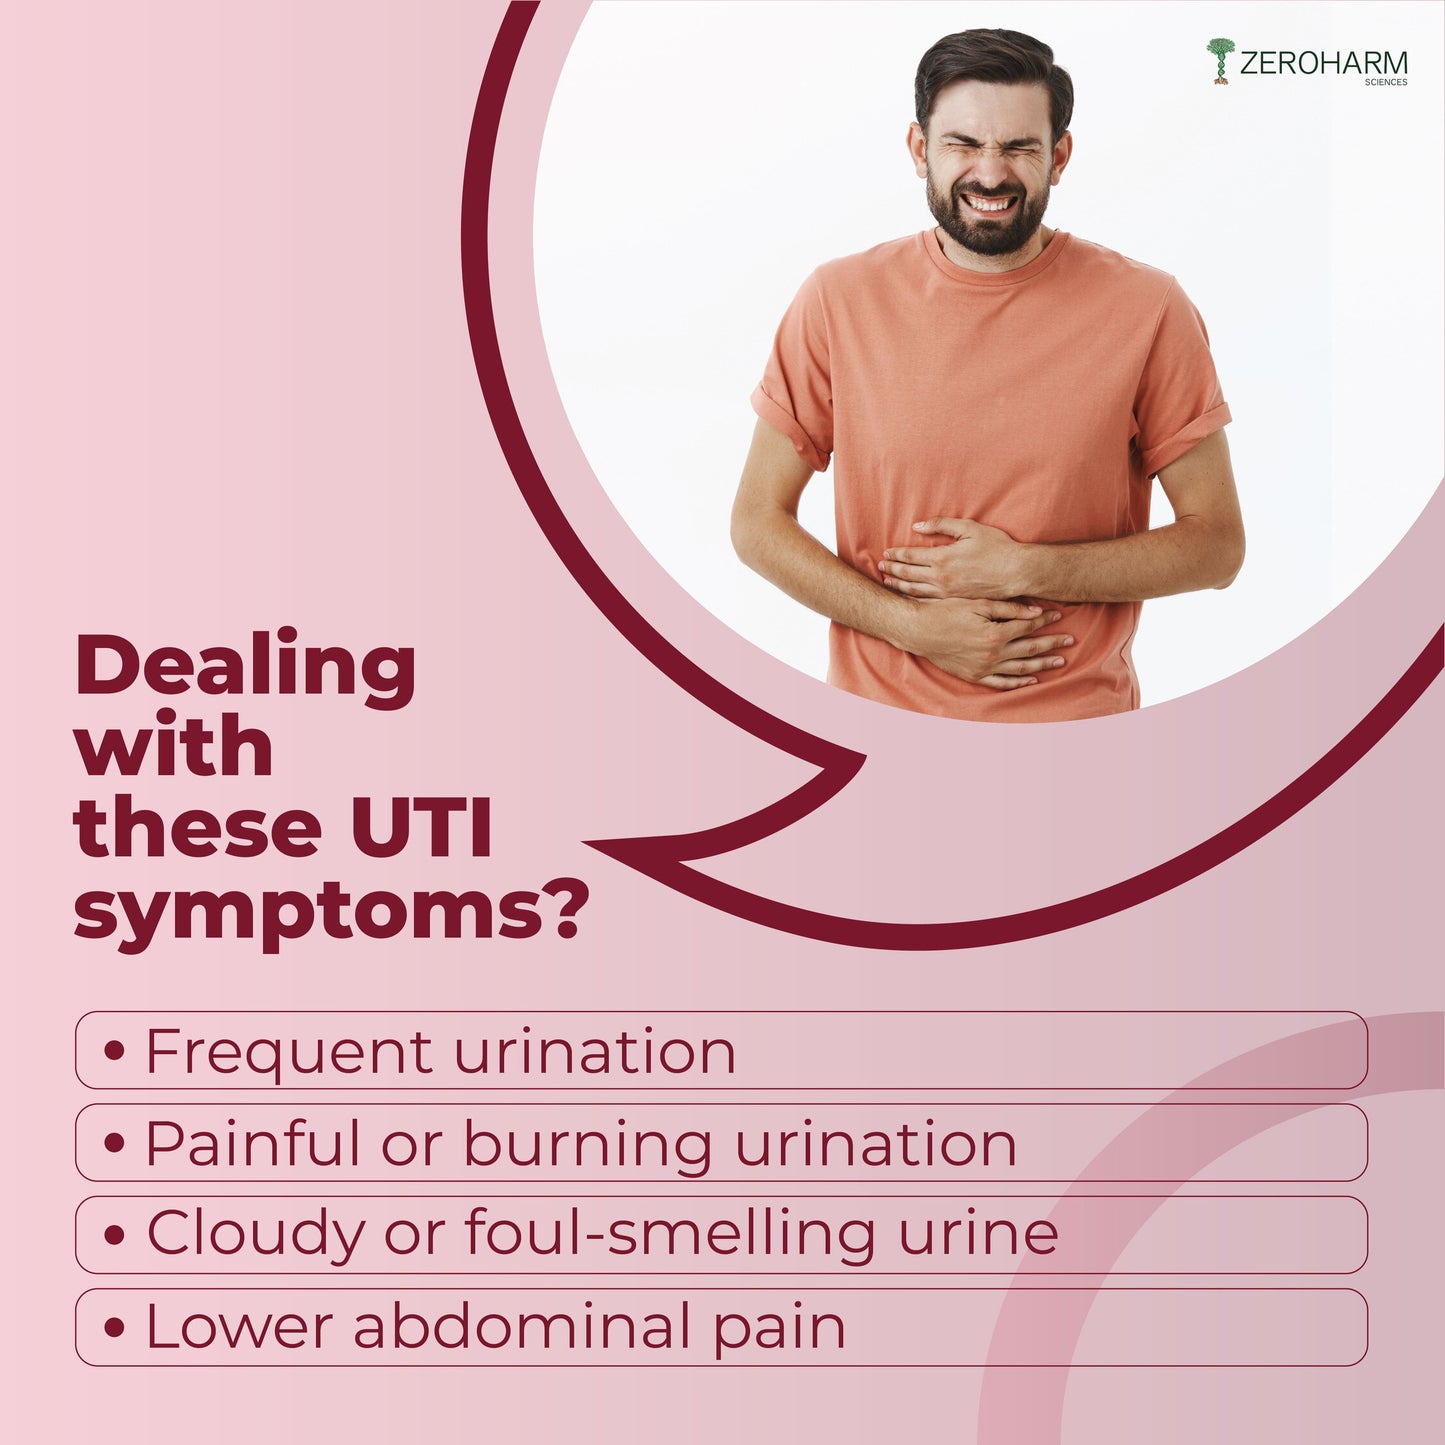 uti tablets for  problems like lower abdominal pain, frequent urination and burning urination